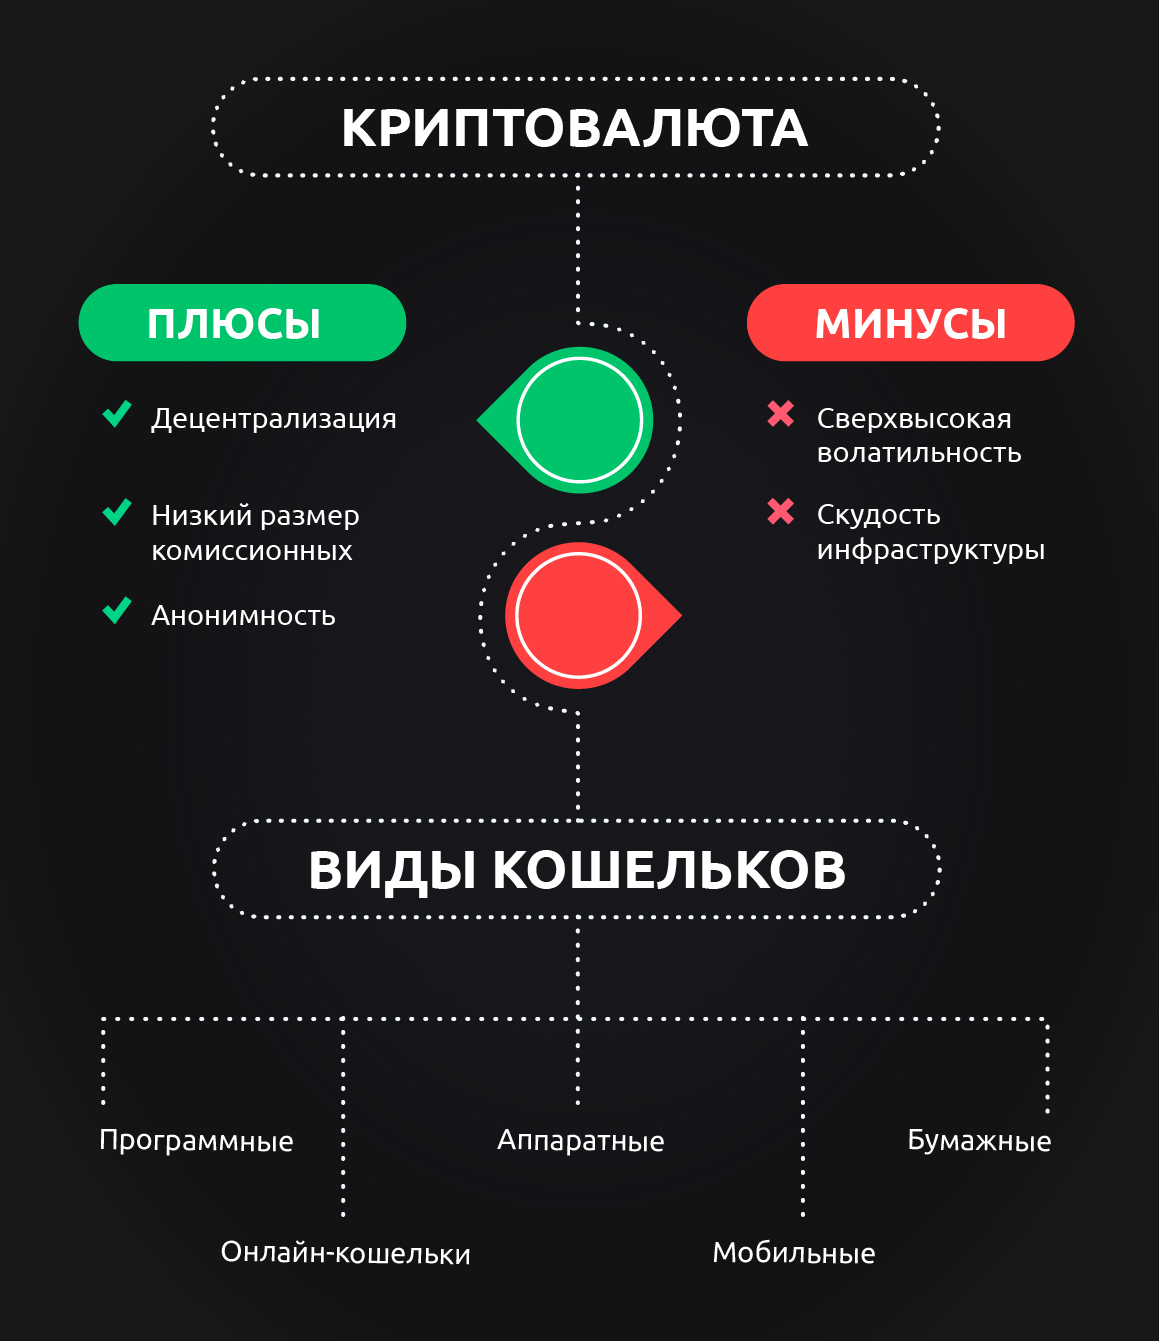 How To Take The Headache Out Of Криптобиржа